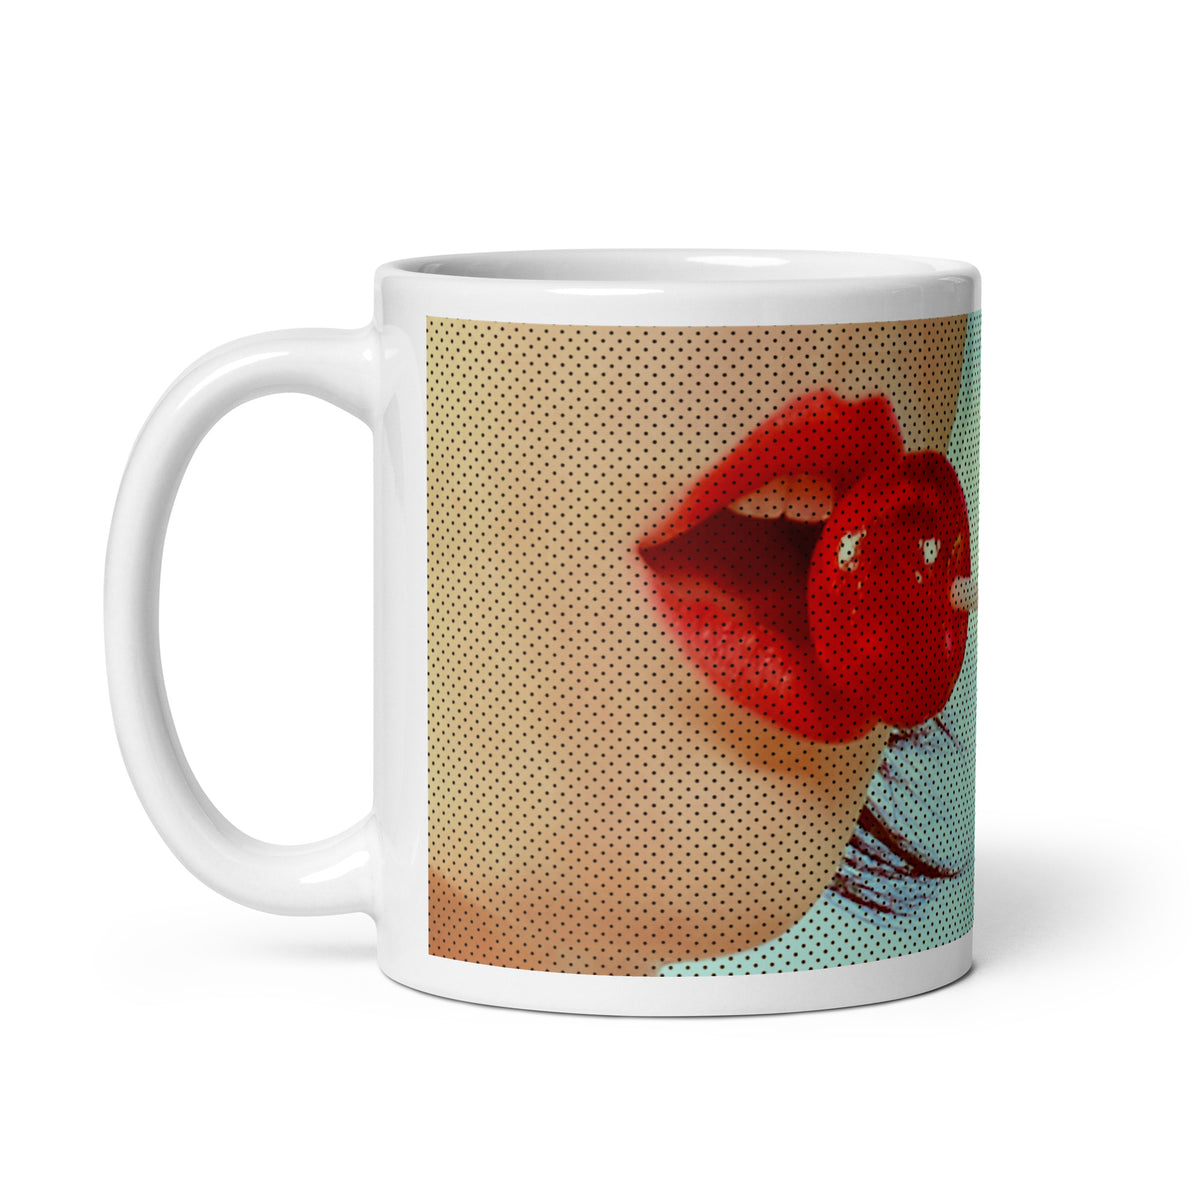 coffee mug with image of a girl with a red lolly pop in a pop art style